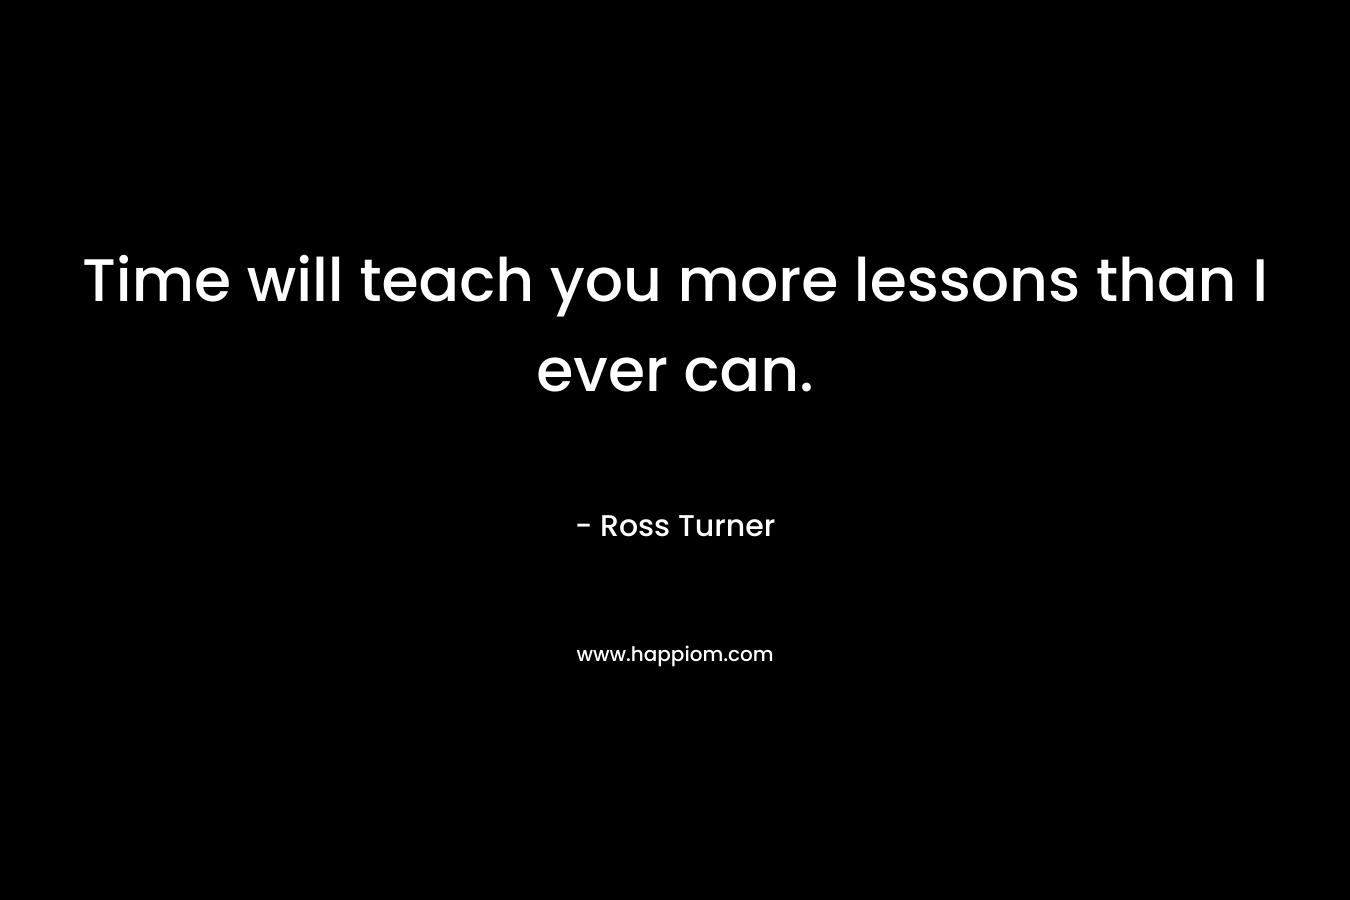 Time will teach you more lessons than I ever can.